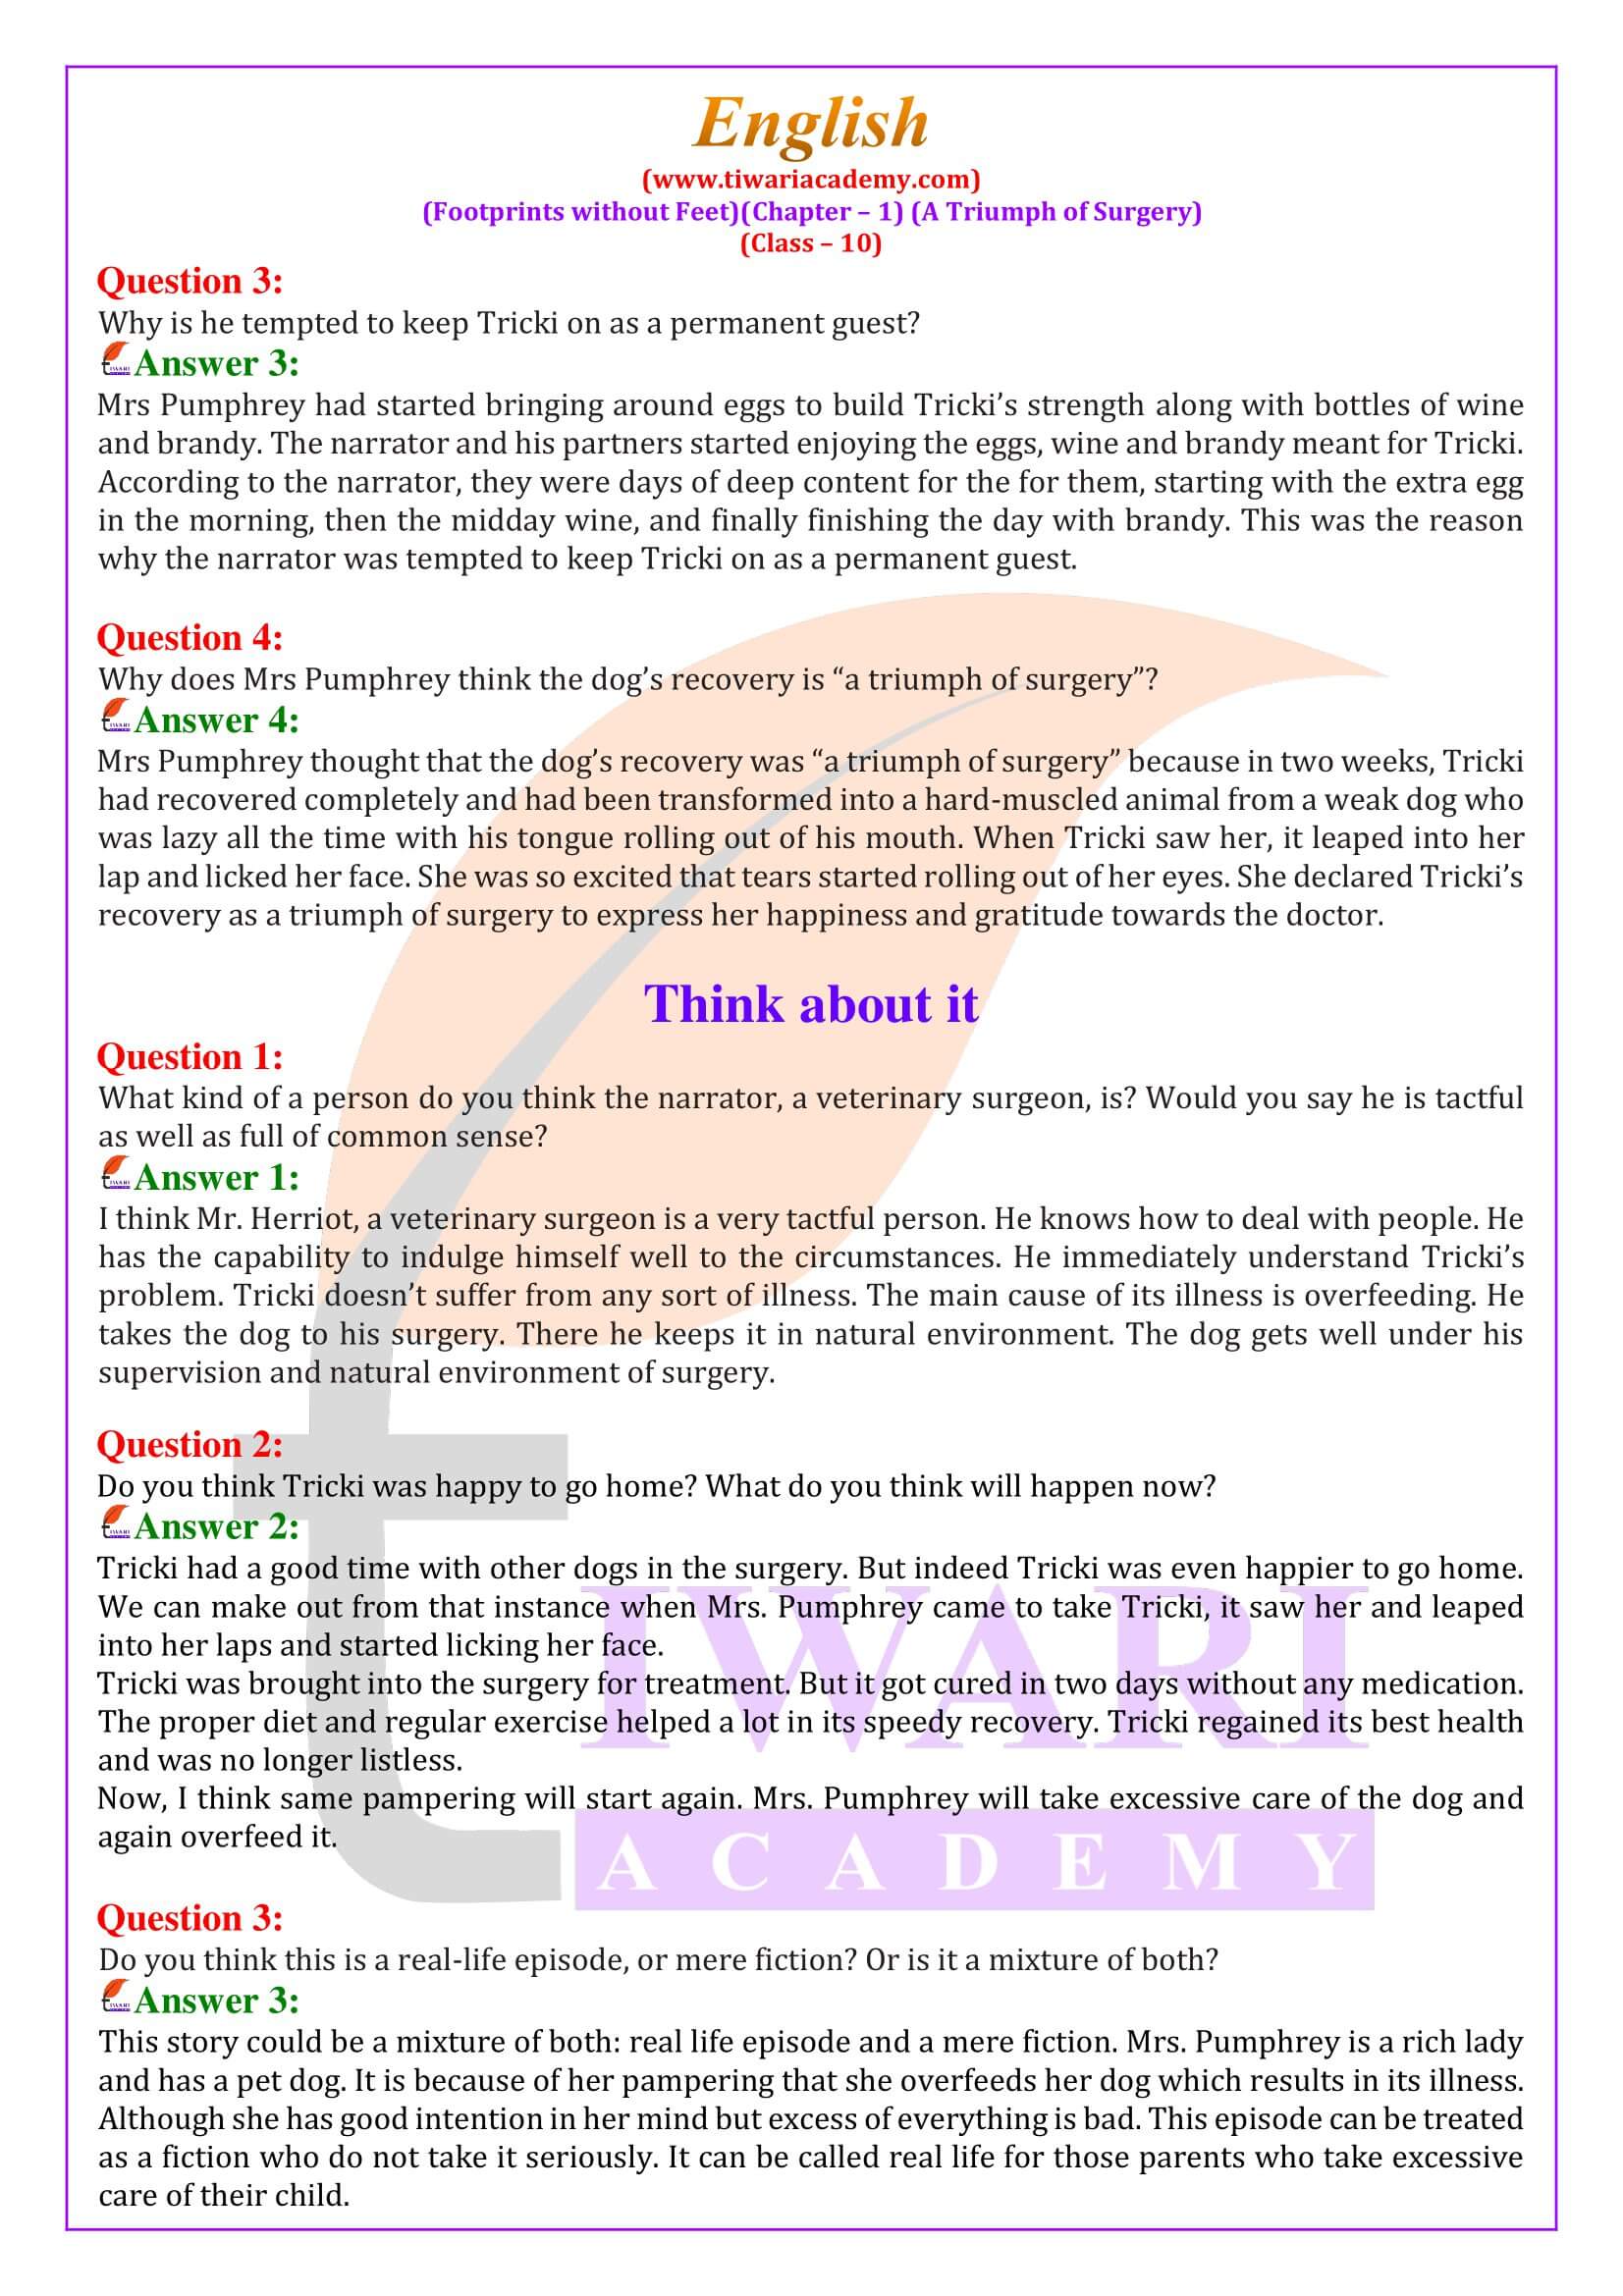 NCERT Solutions for Class 10 English Footprints without feet Chapter 1 Guide